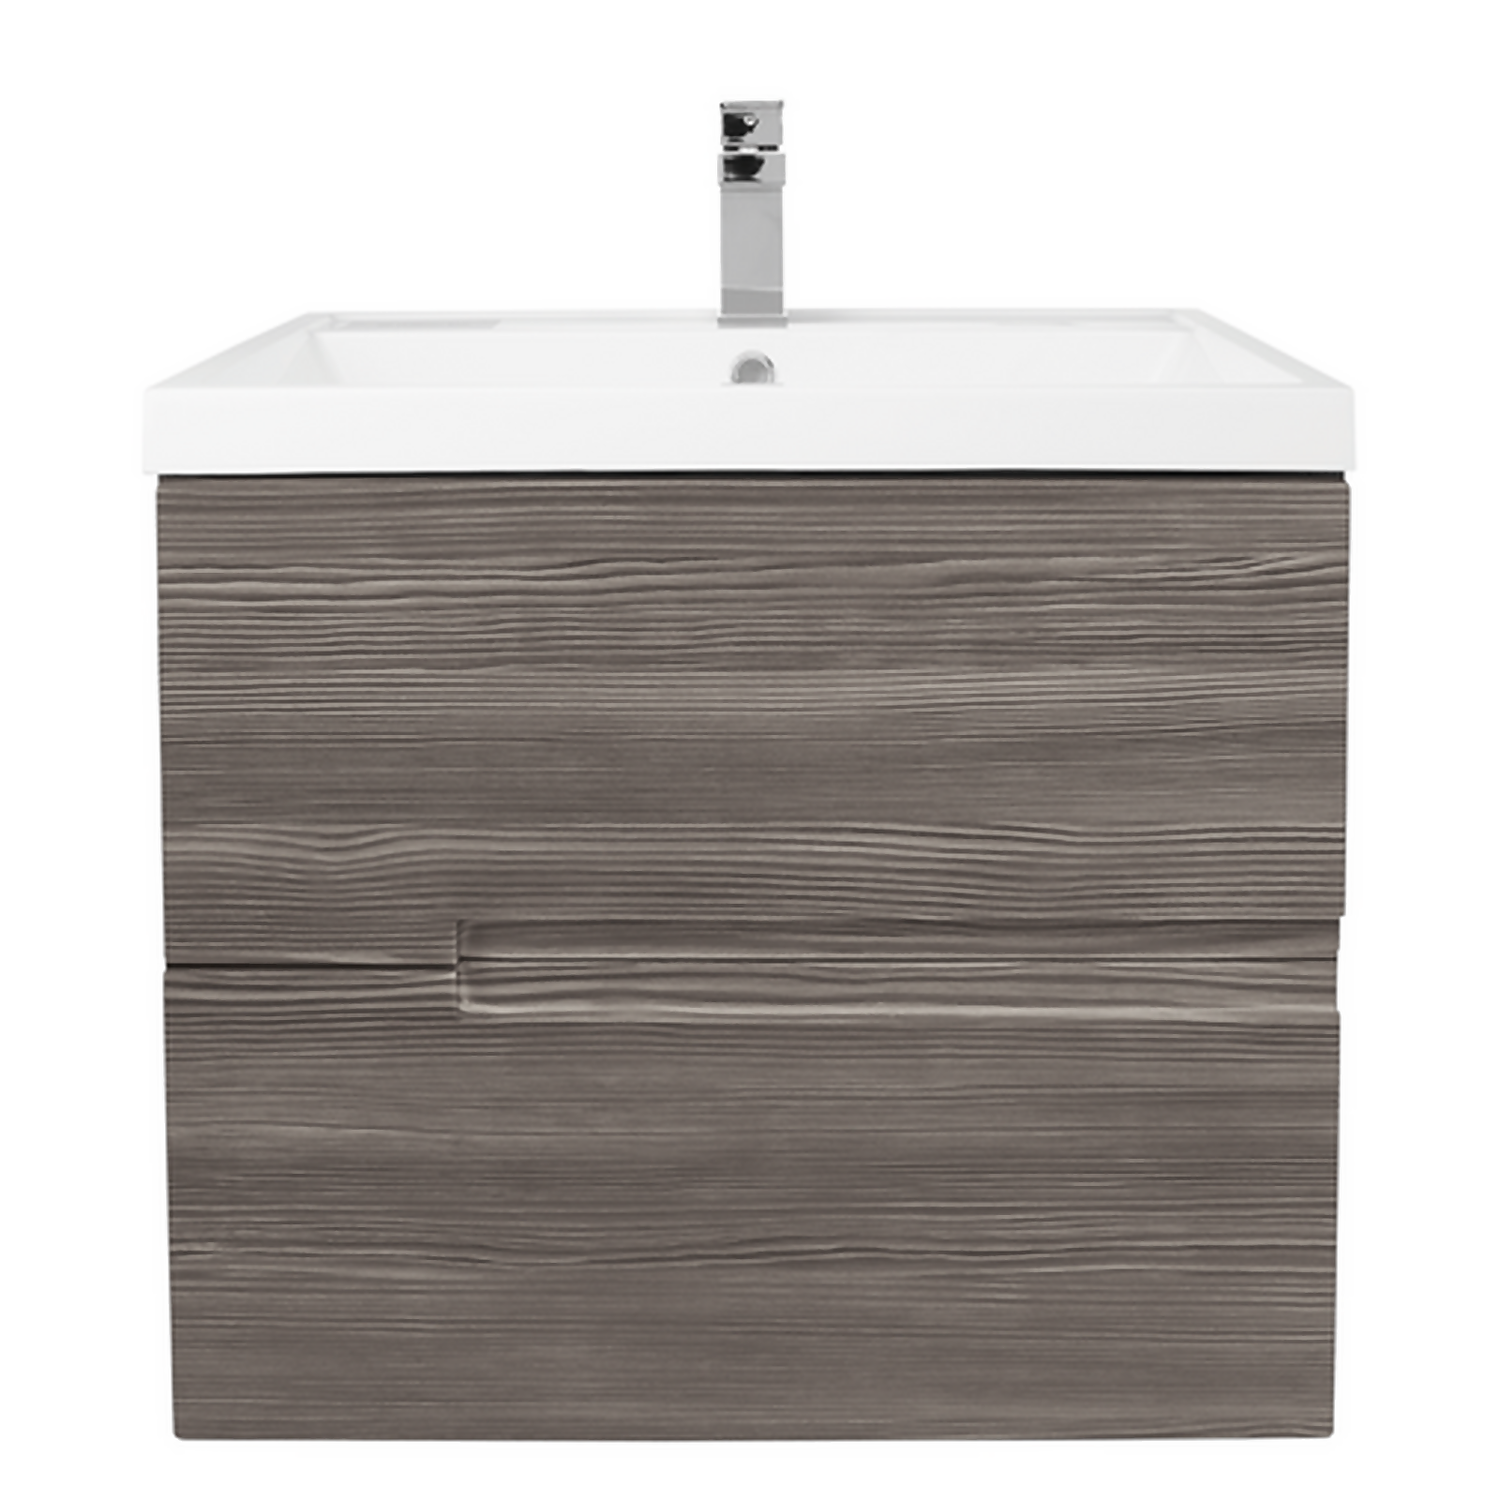 Vermont 600mm Wall Hung Vanity Unit with Basin - Grey Avola